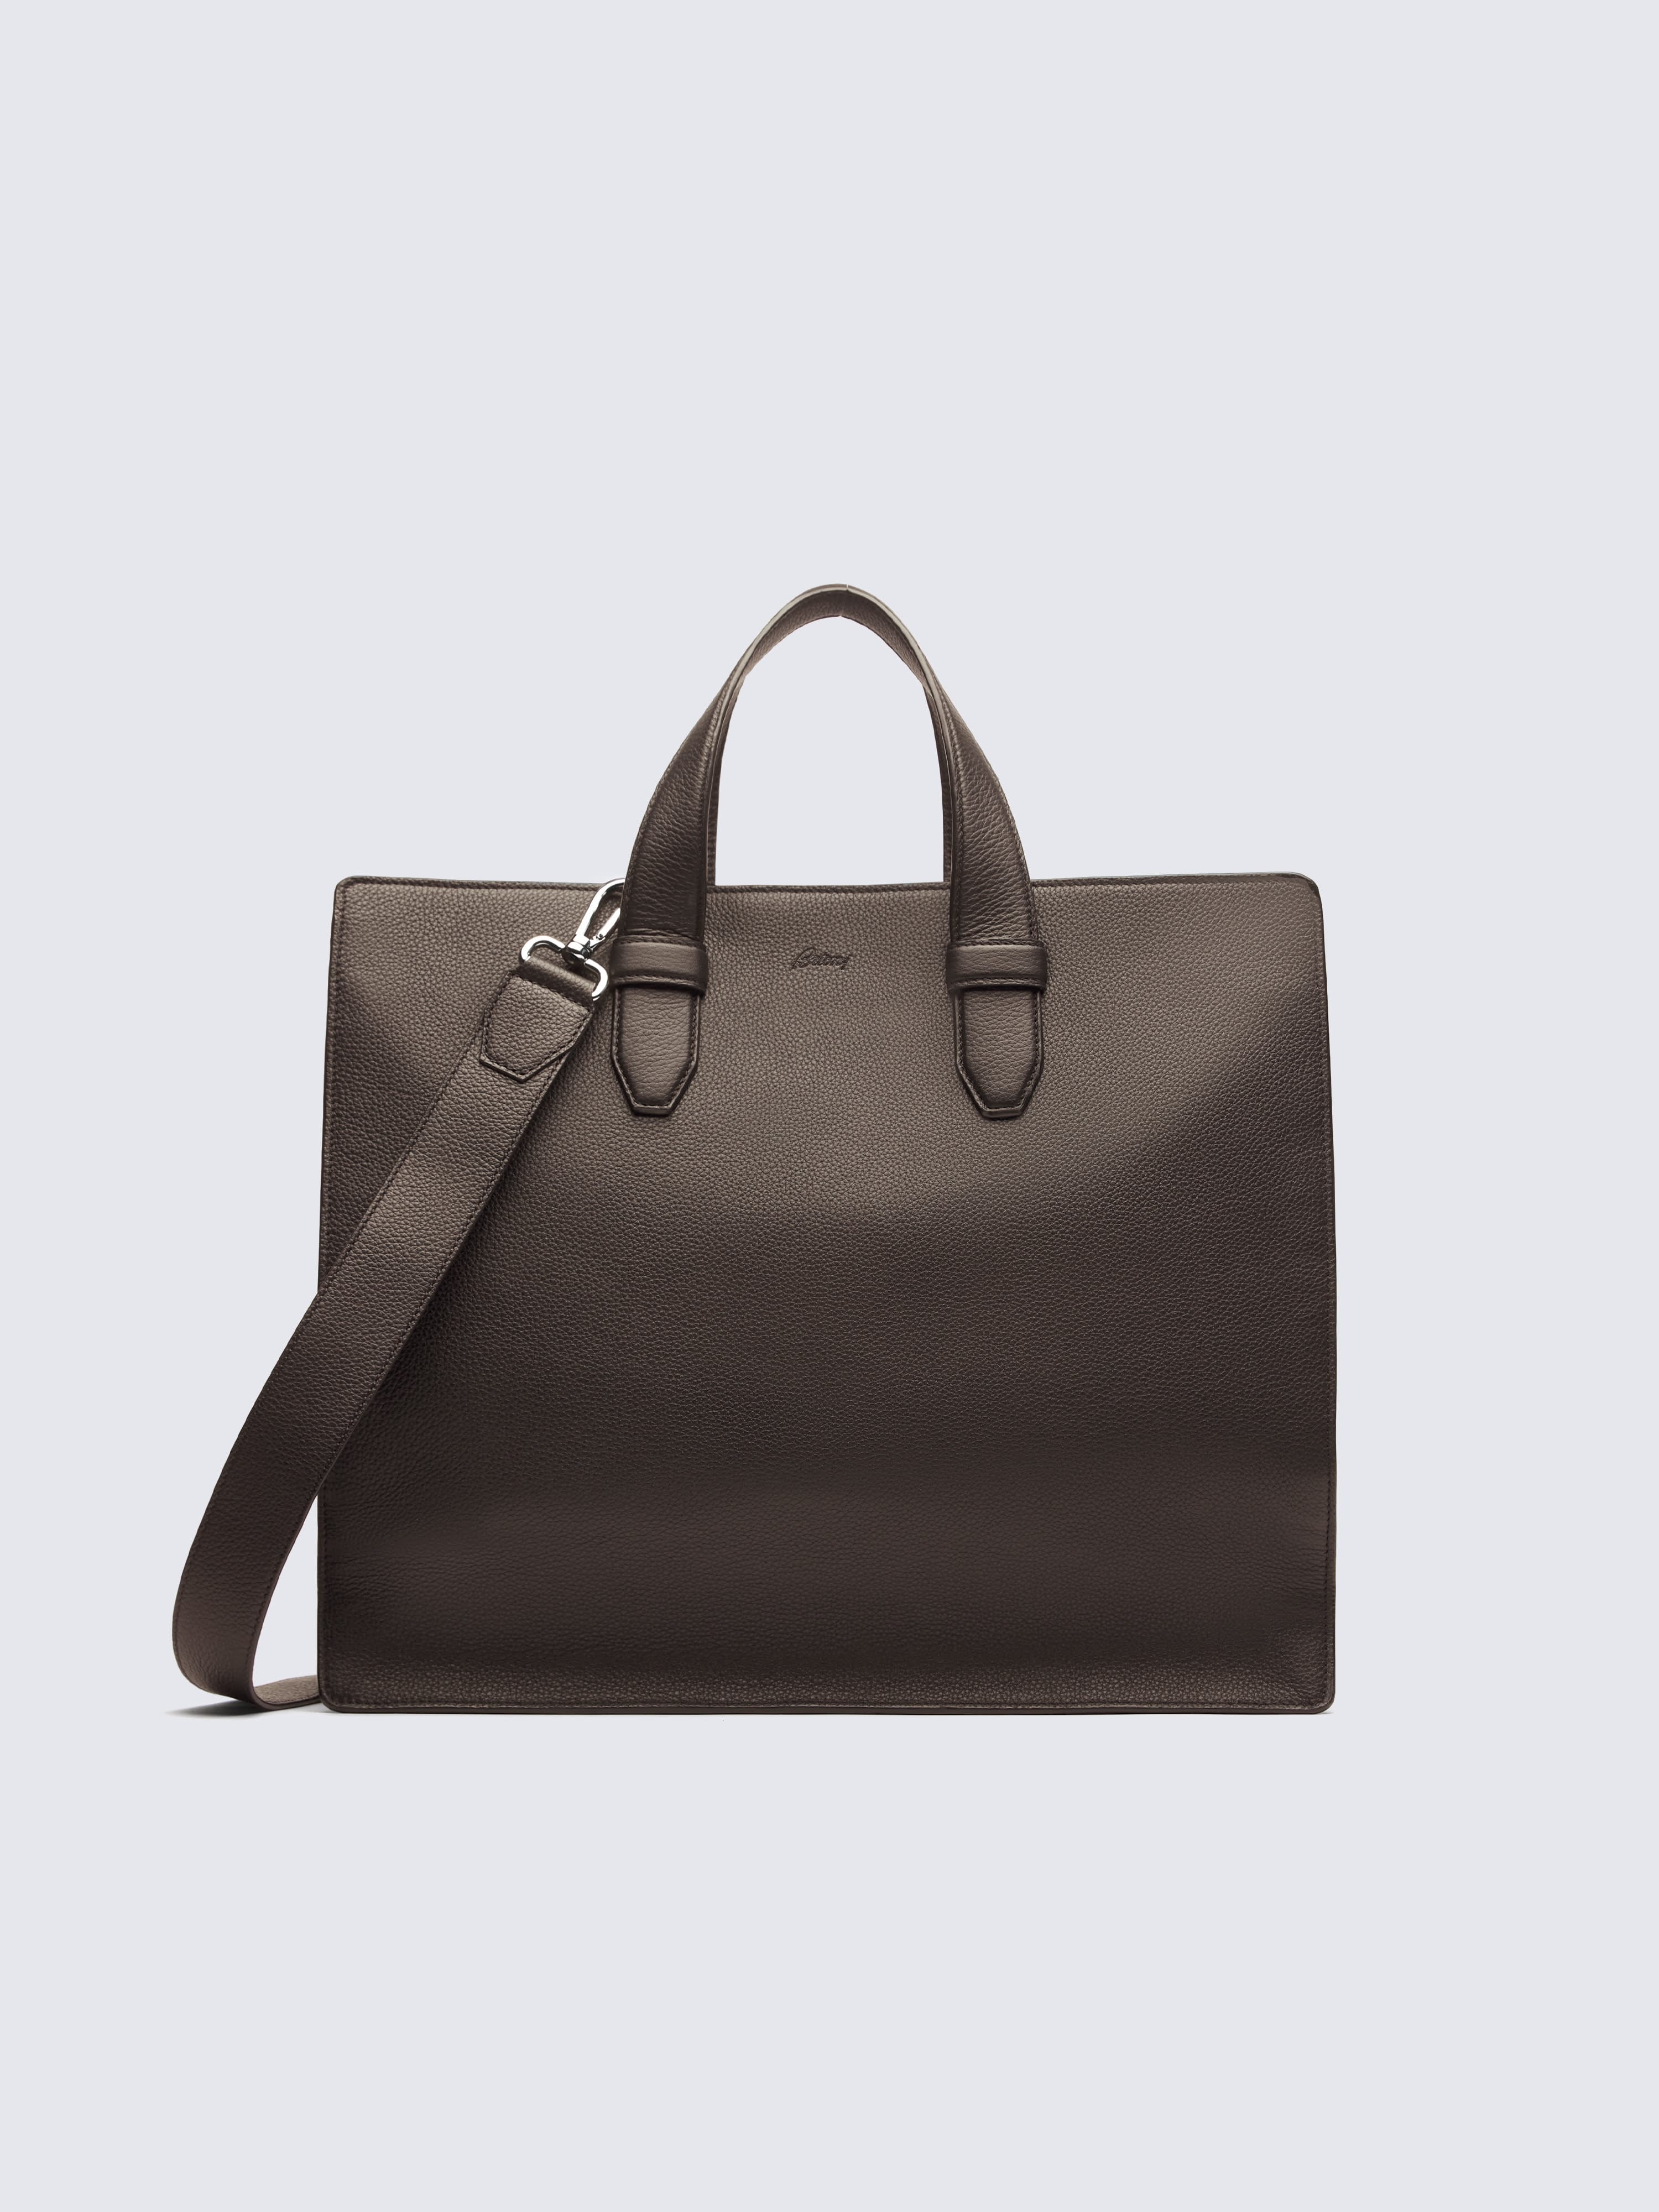 Brown Grained Leather Tote Bag